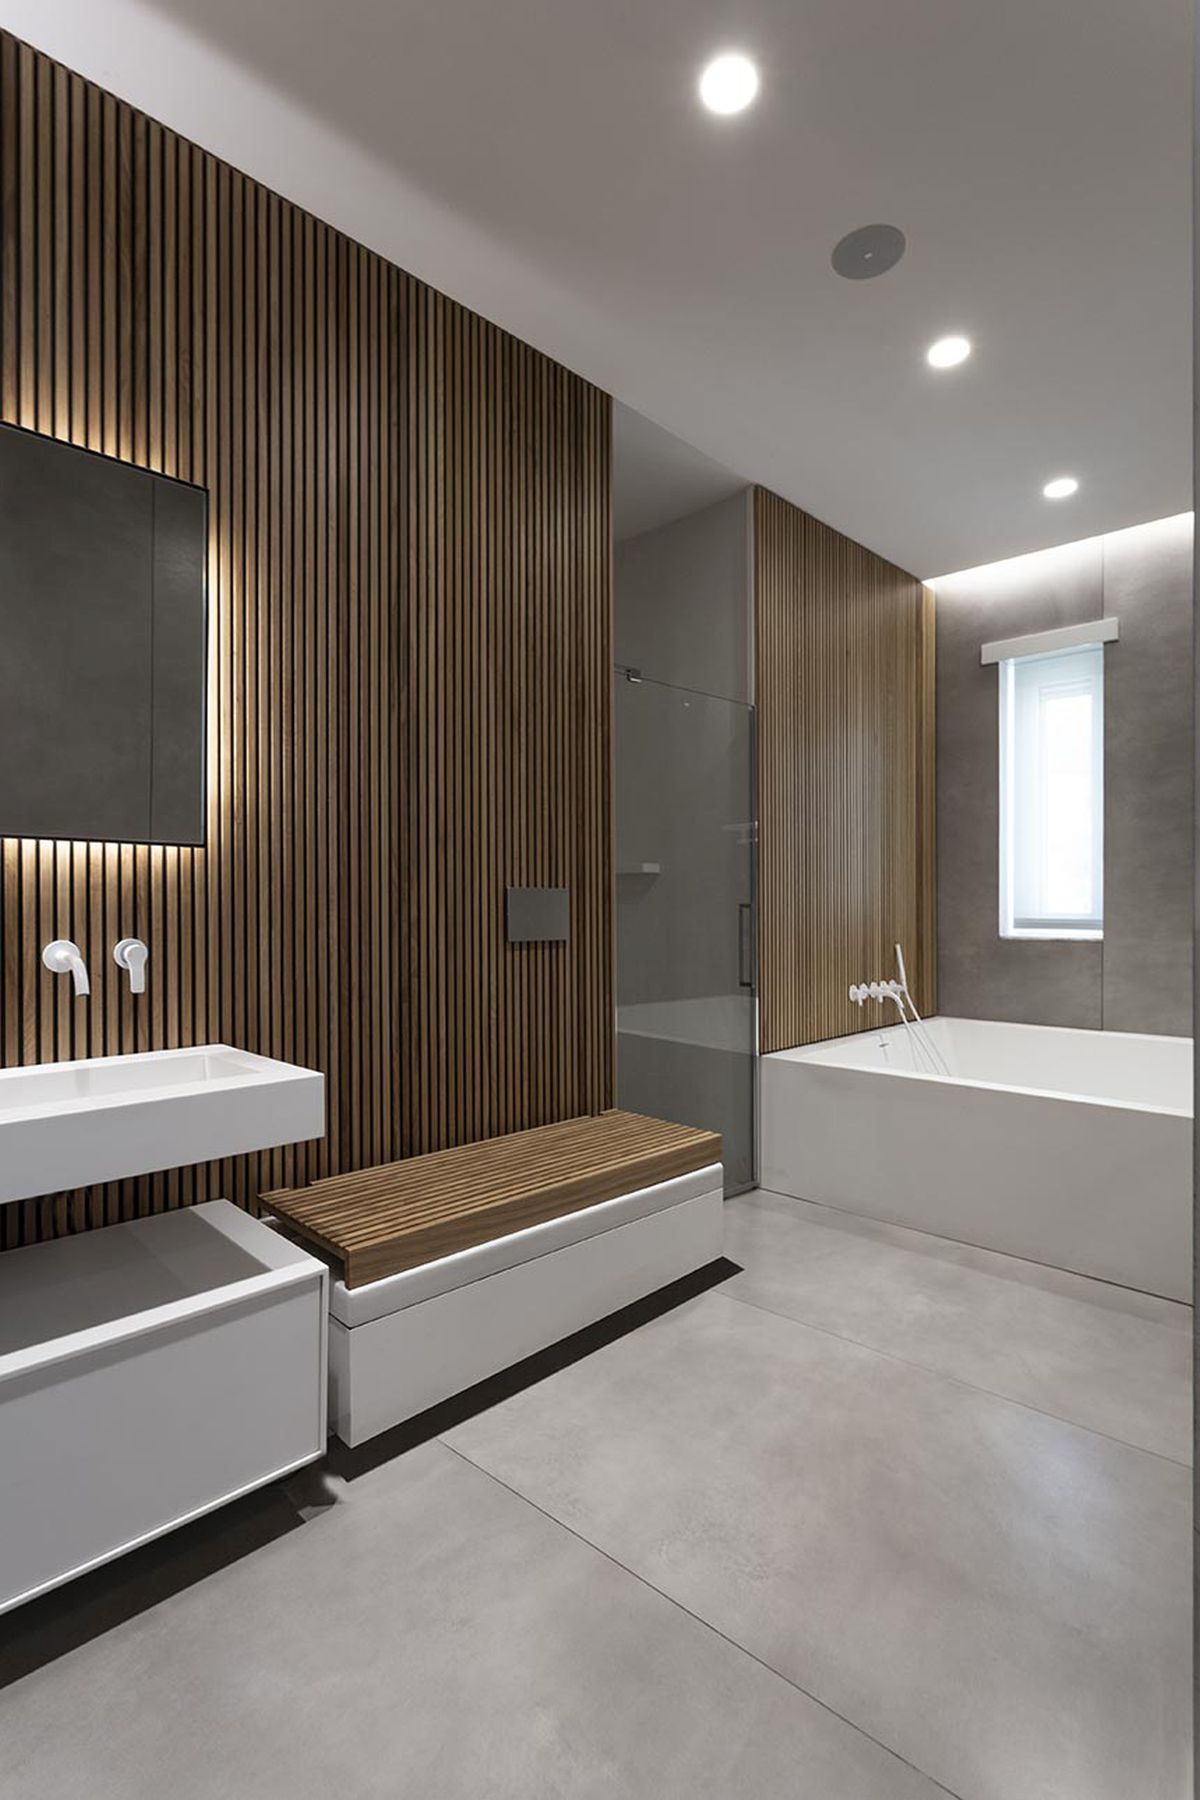 The wood accents and spacious layout give the bathroom a very welcoming and sophisticated look